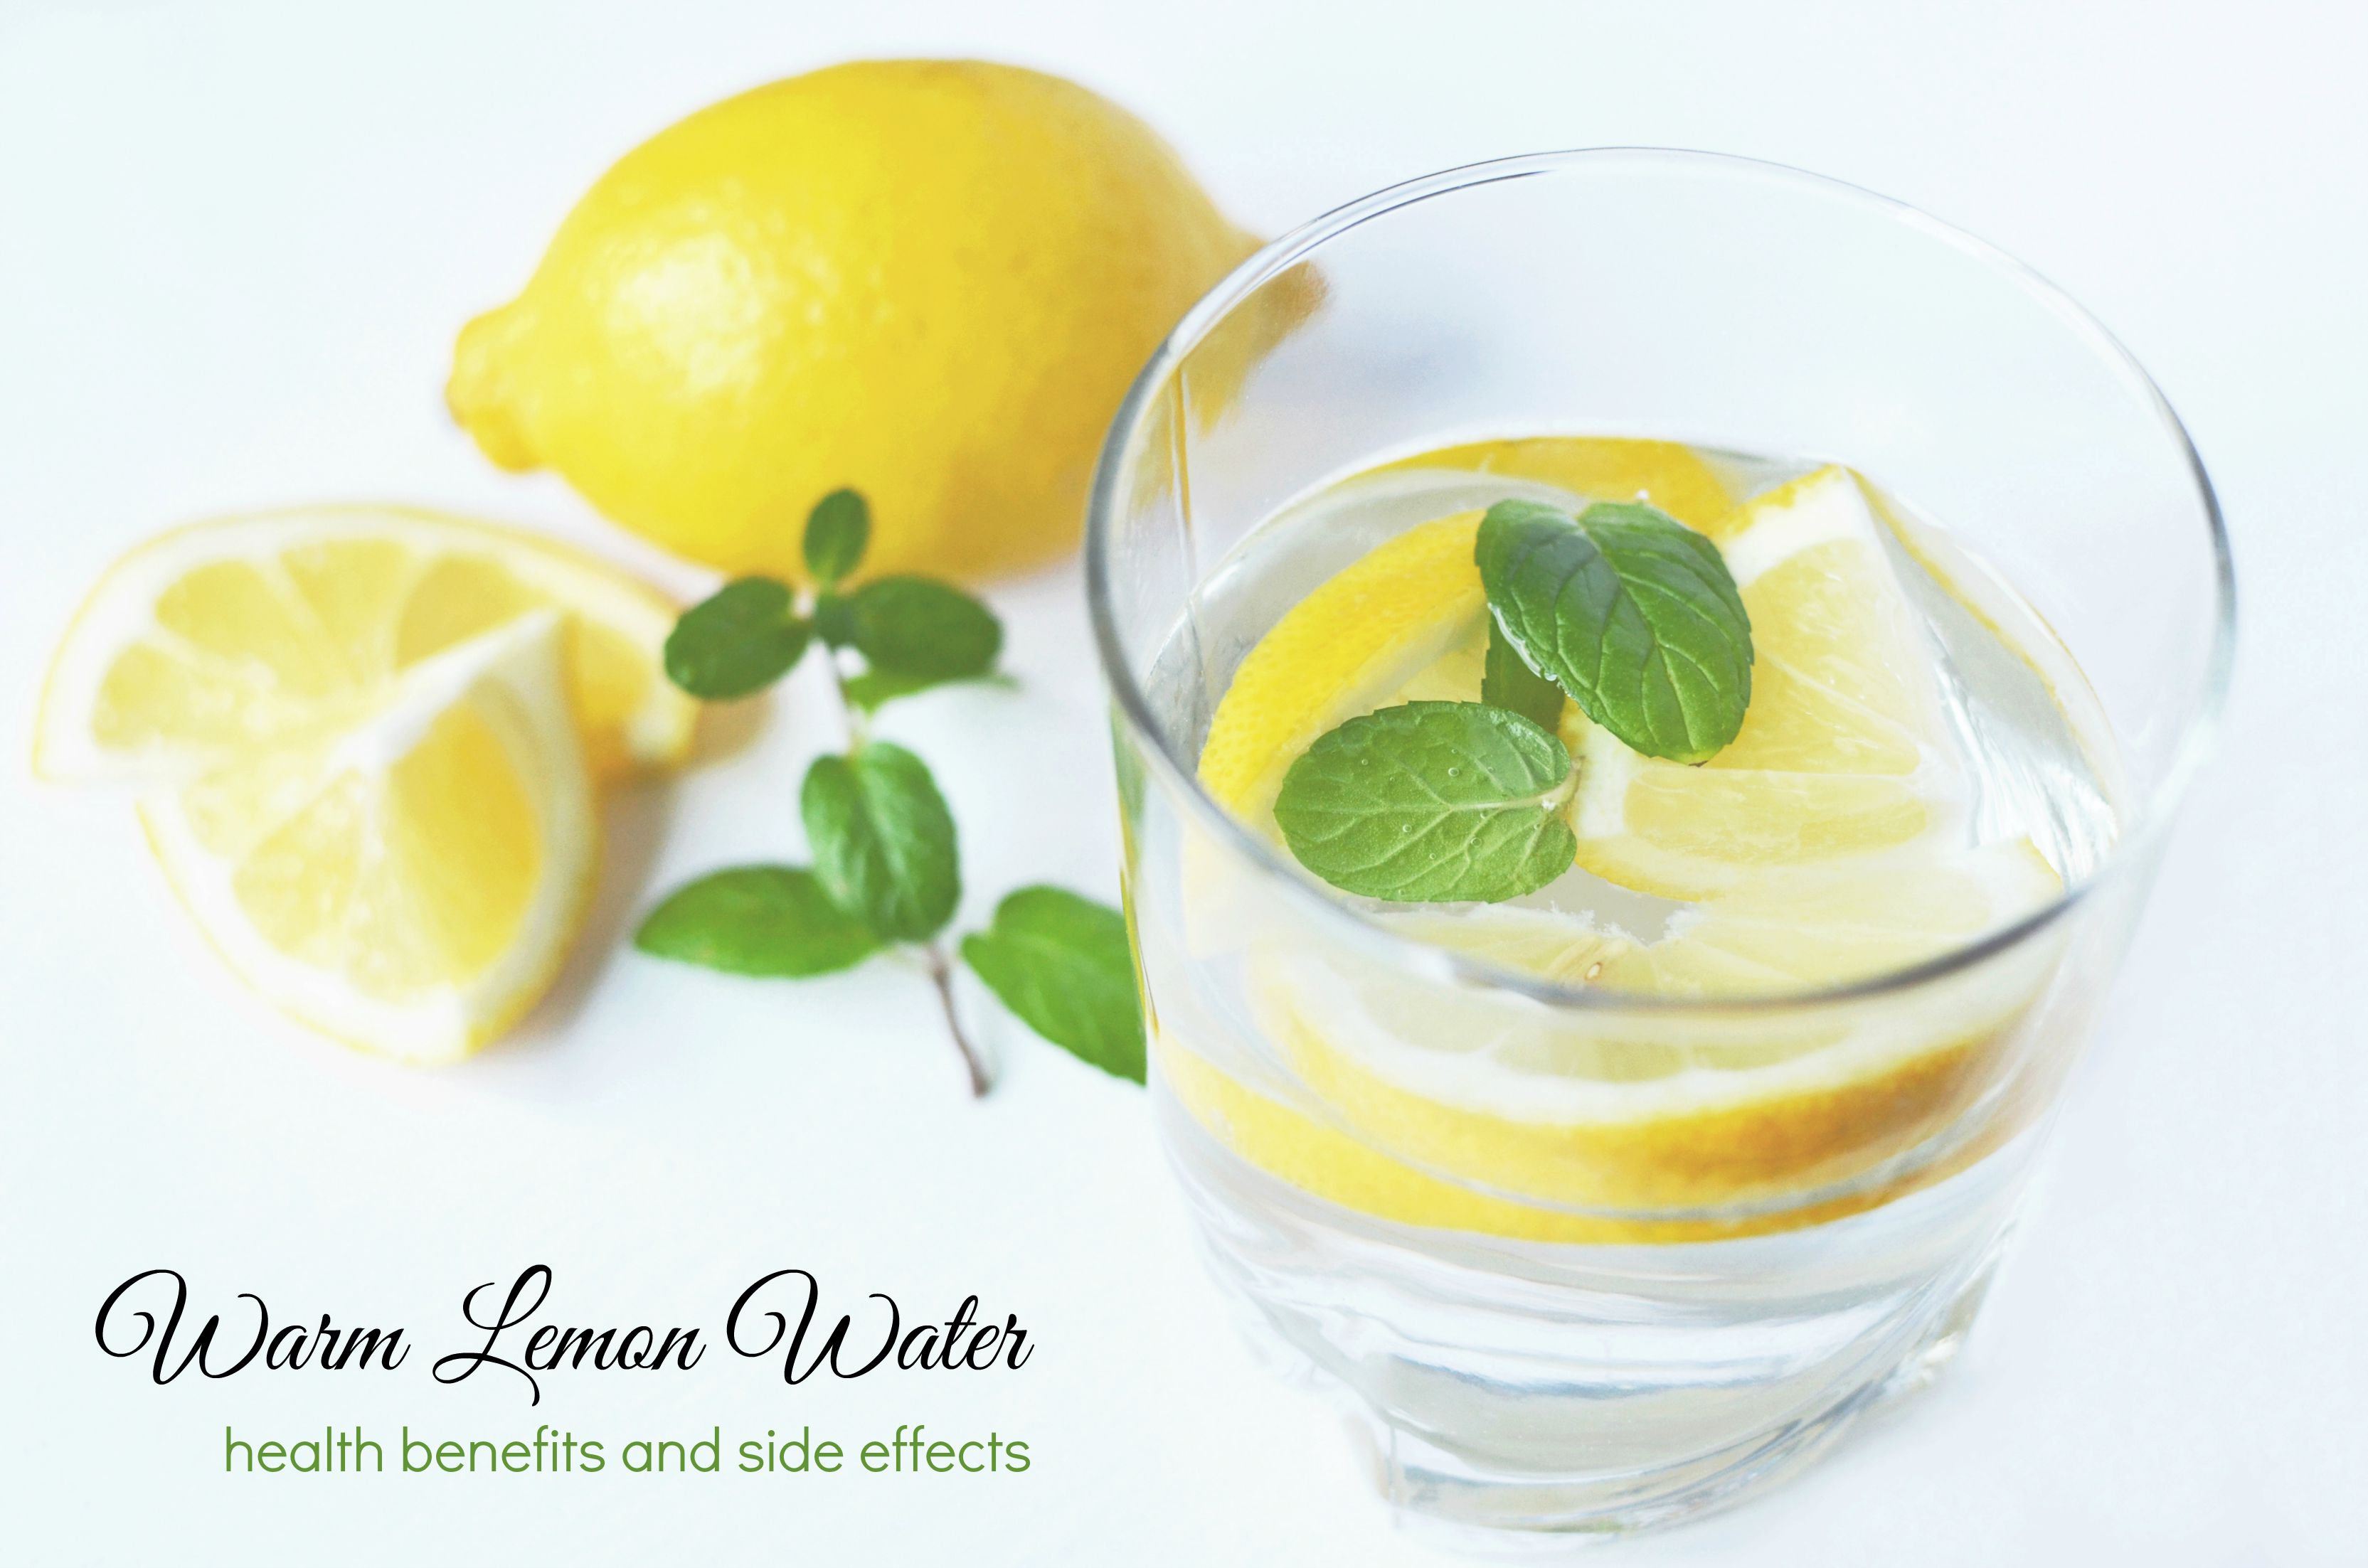 Warm Lemon Water Benefits and Side Effects - Turning the Clock Back